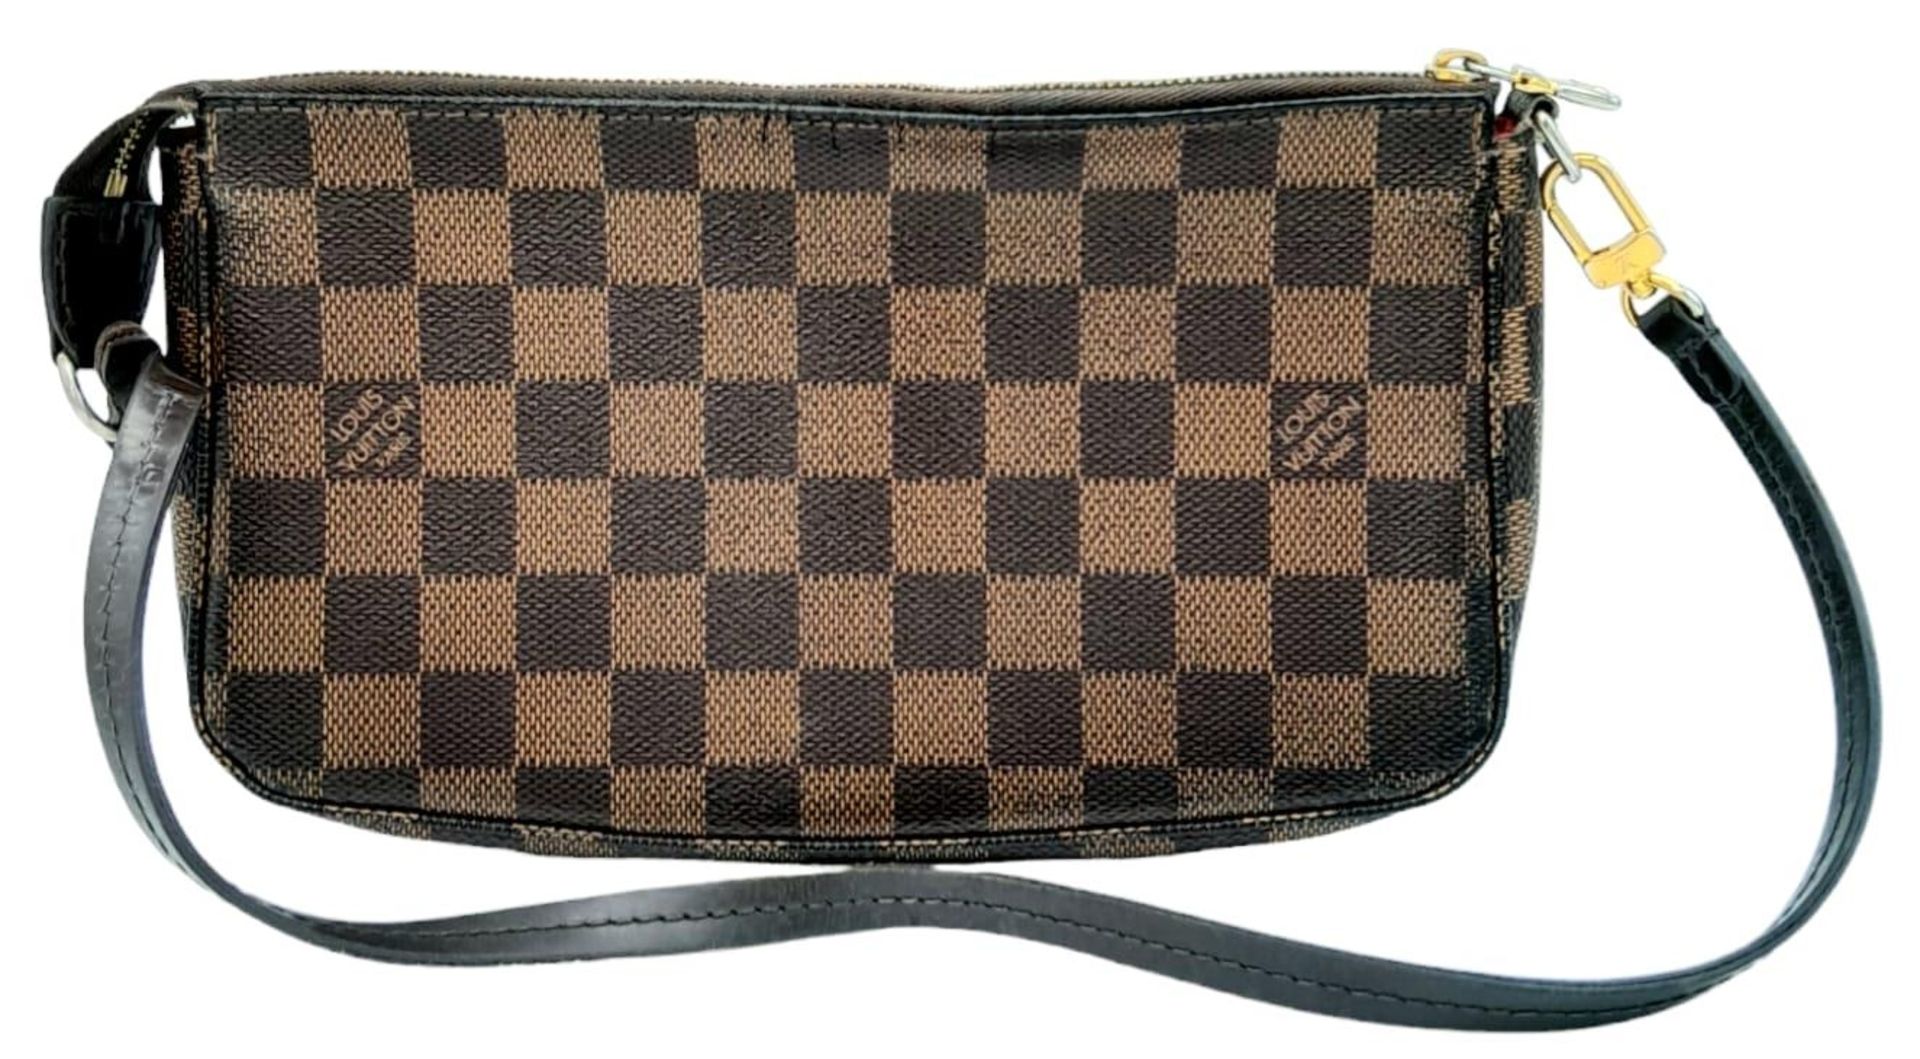 A Louis Vuitton Damier Ebene Pochette with Leather Exterior. Top Zip Closure. Red Fabric Lining with